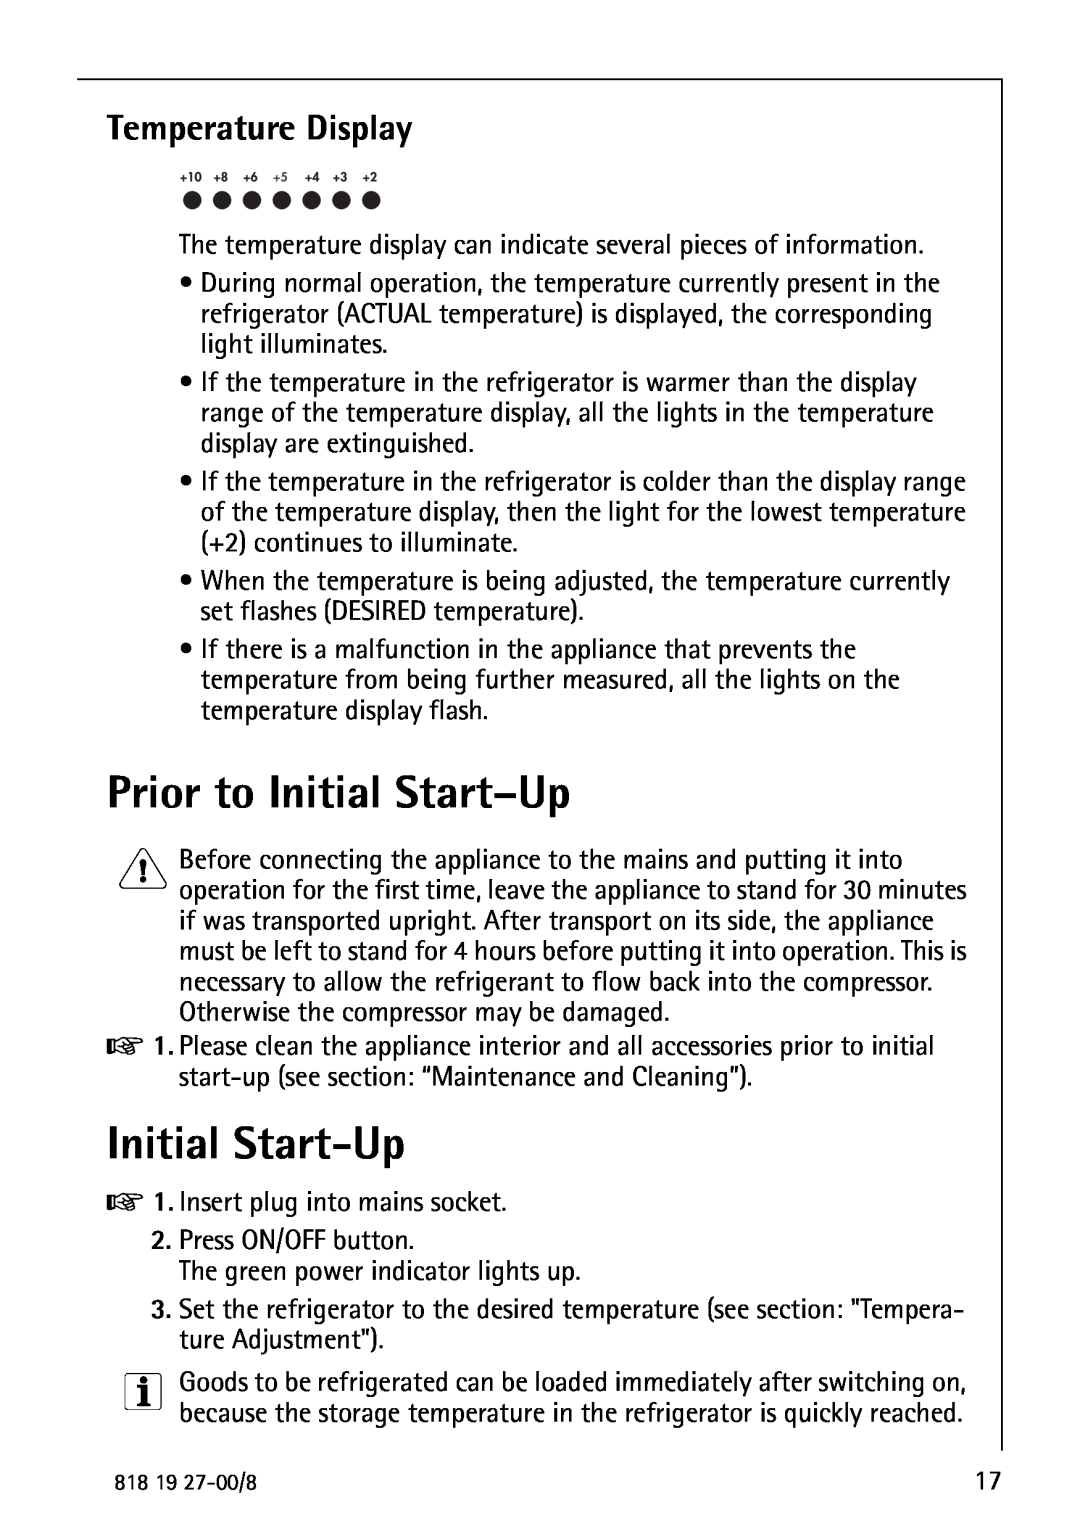 Electrolux Upright Refrigerator manual Prior to Initial Start-Up, Temperature Display 